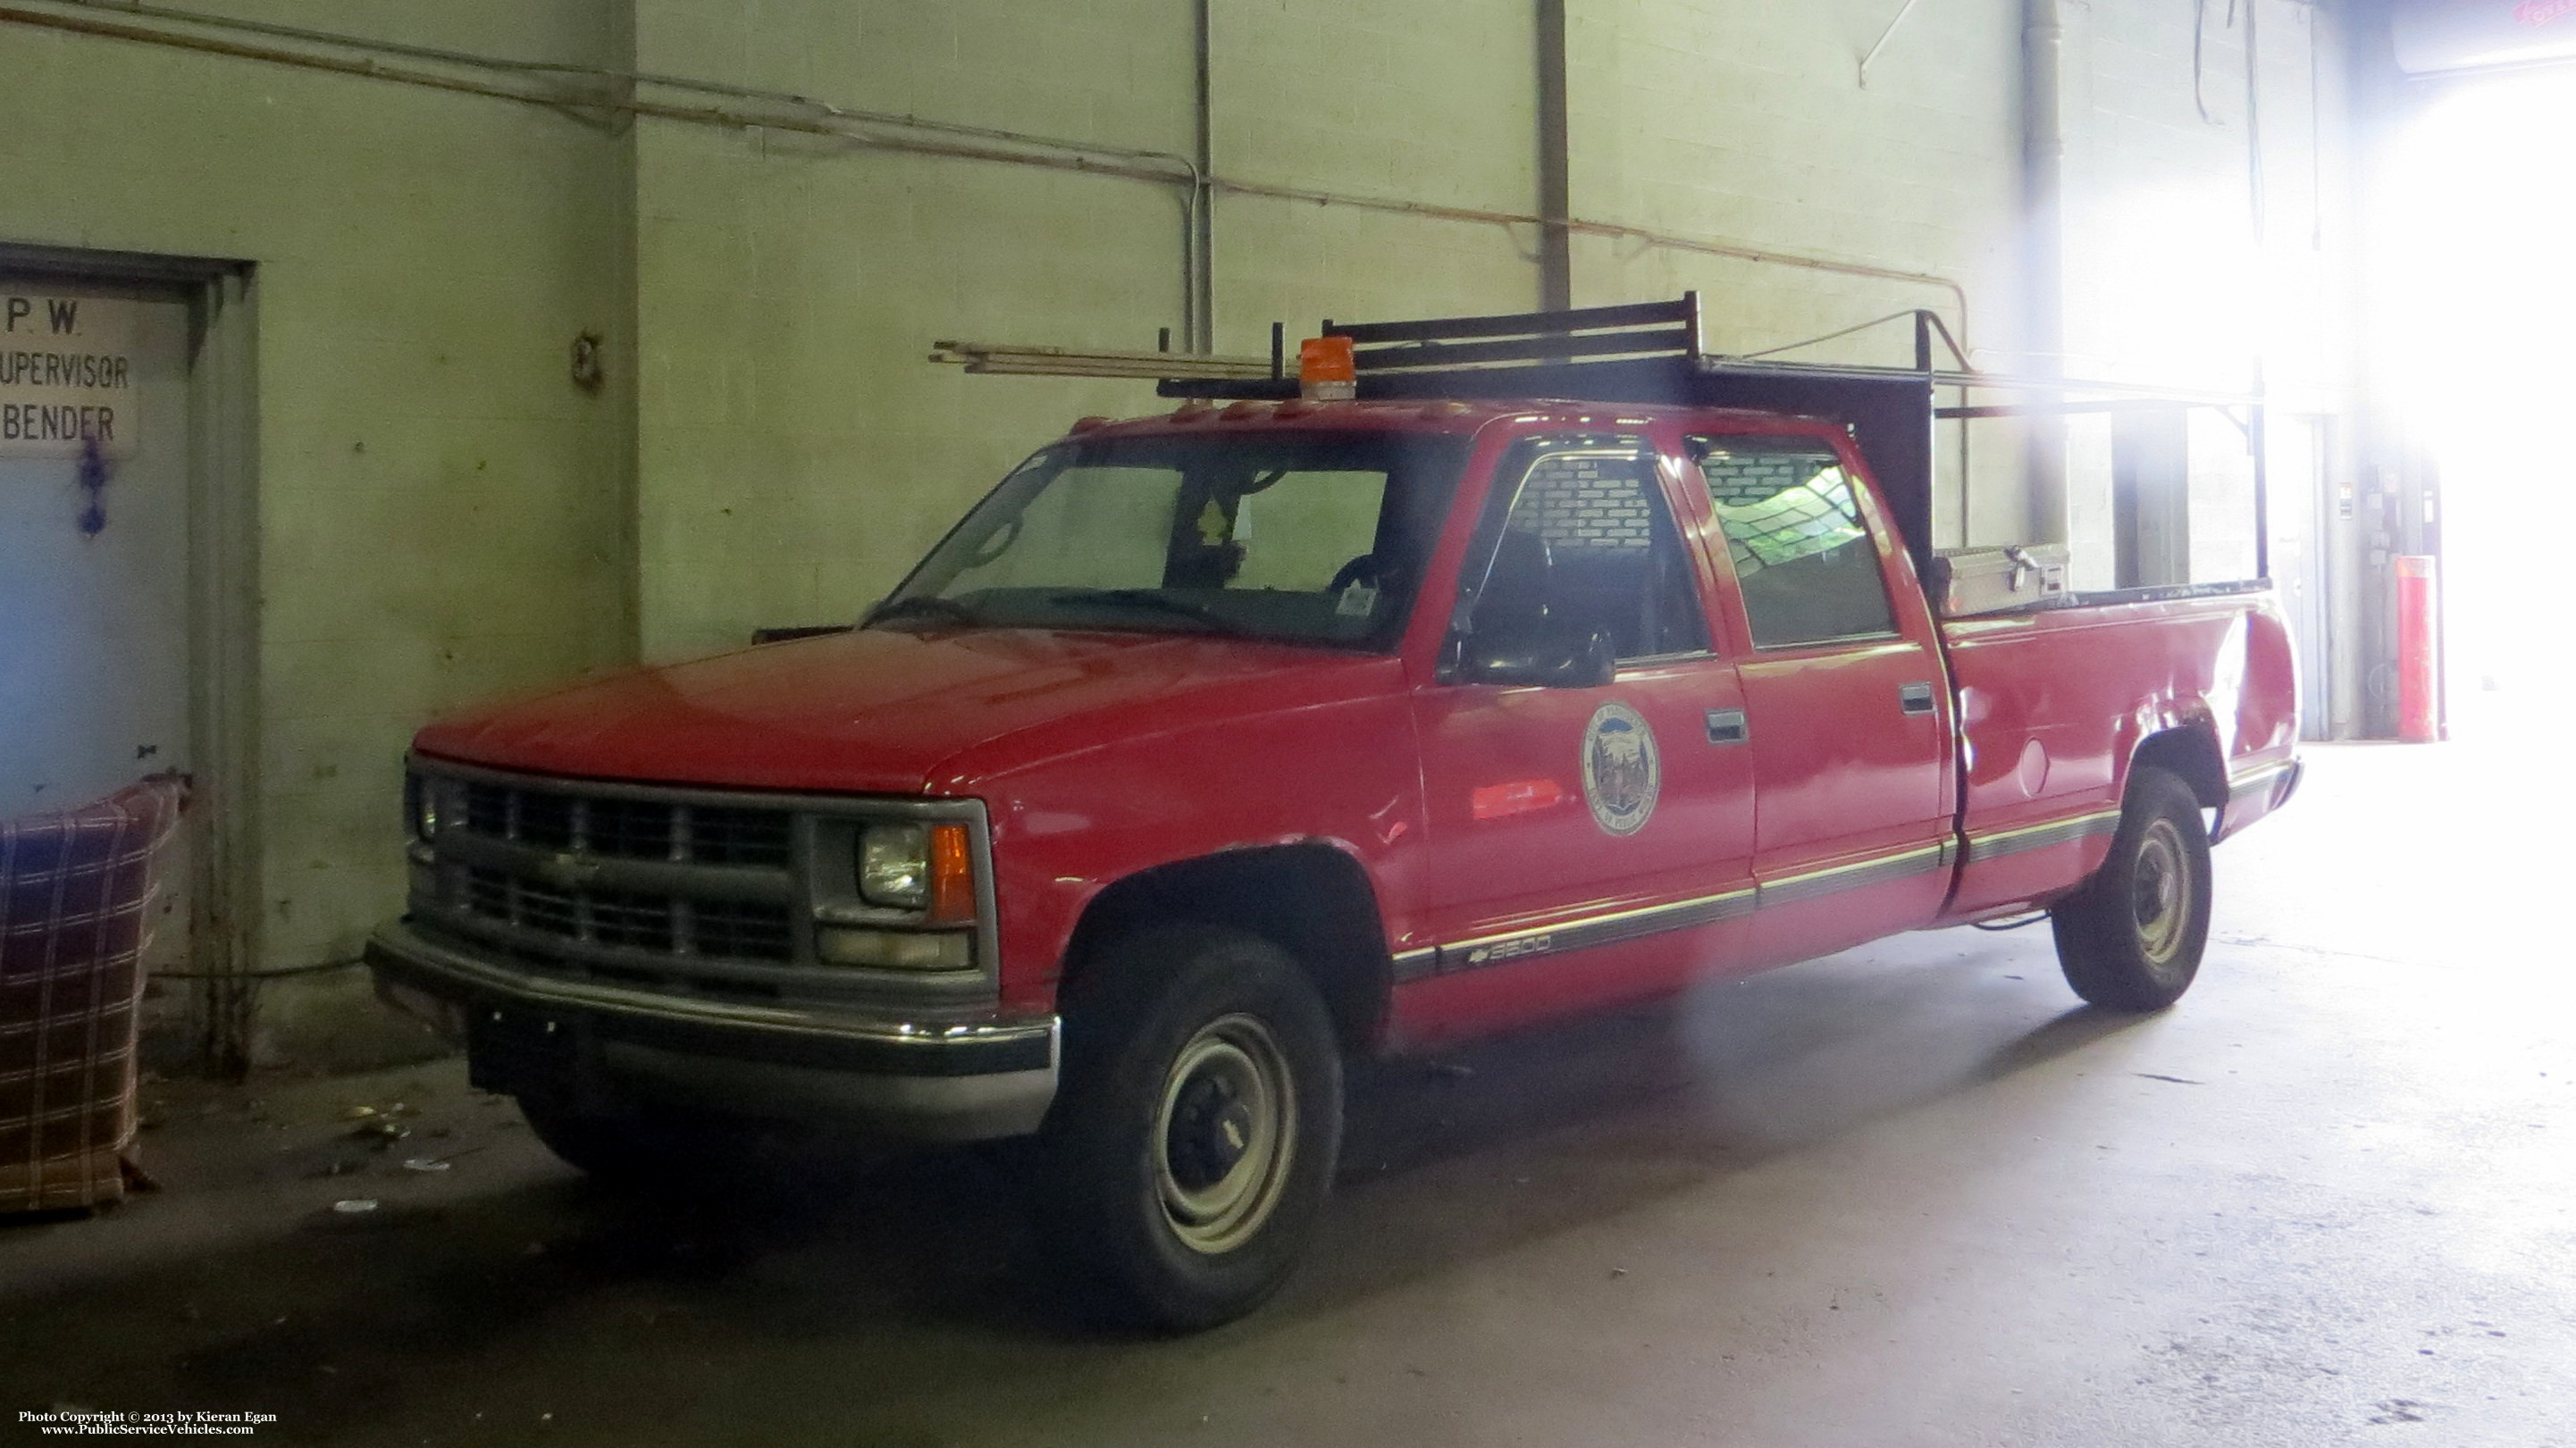 A photo  of Providence Highway Division
            Truck 181, a 1988-1998 Chevrolet 3500 Crew Cab             taken by Kieran Egan